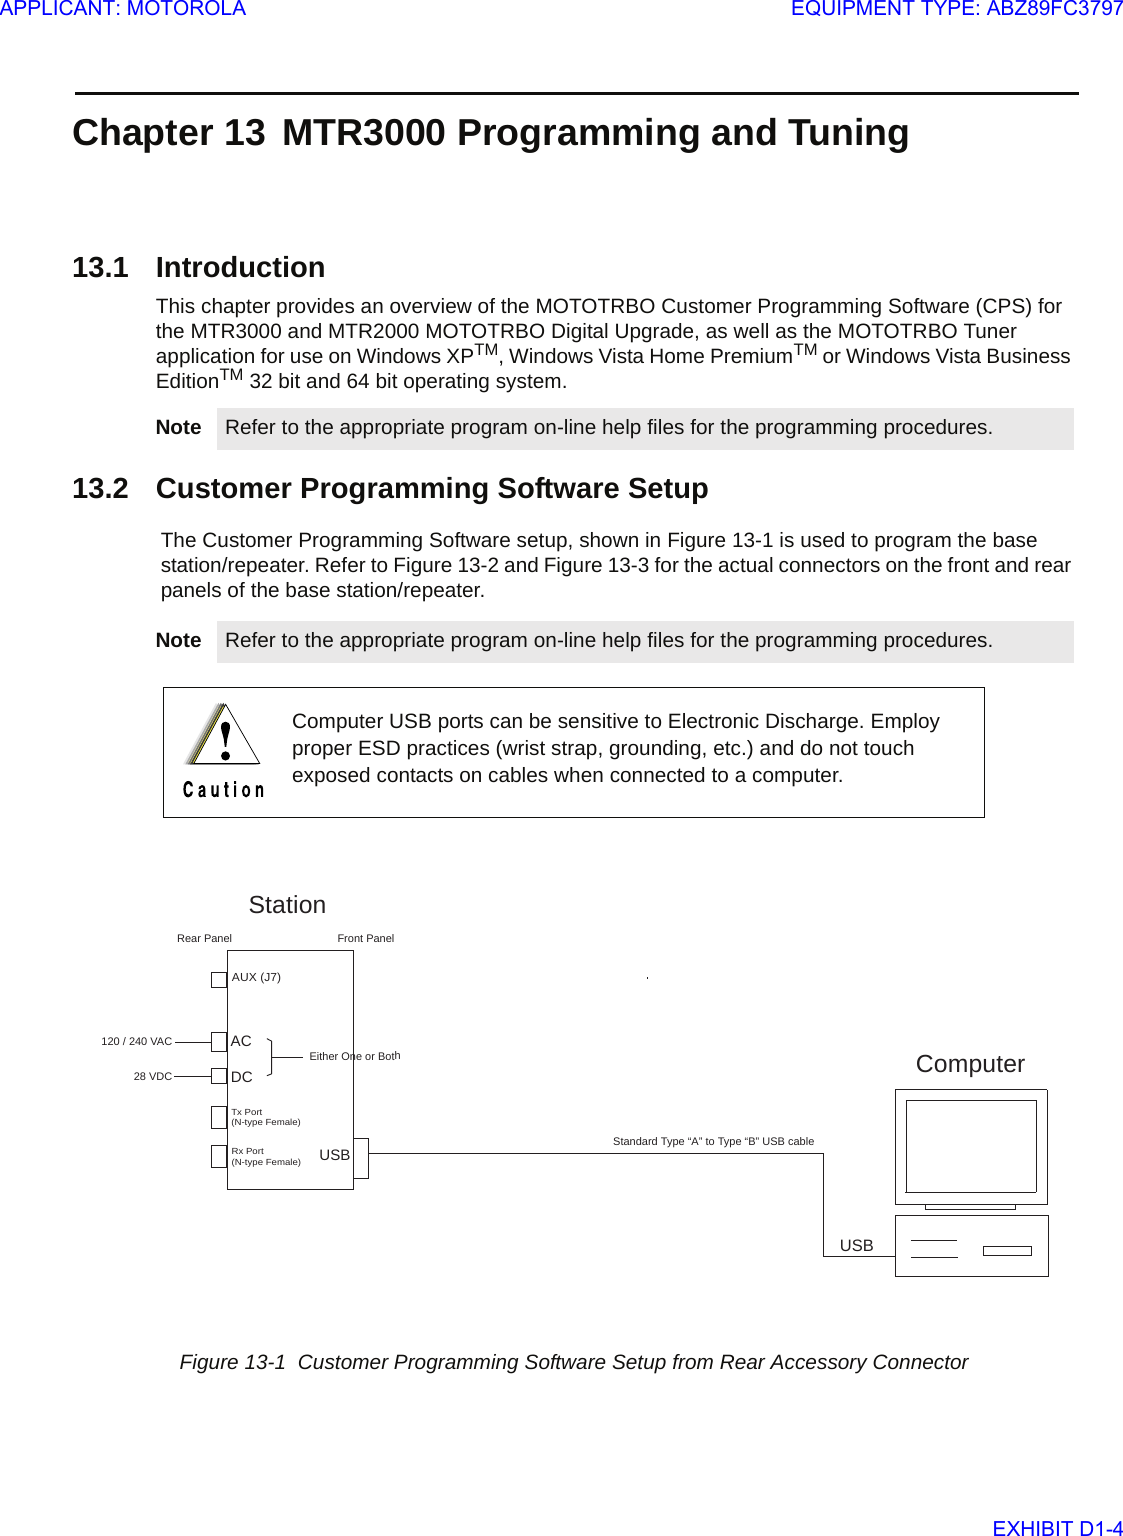 Chapter 13 MTR3000 Programming and Tuning13.1 IntroductionThis chapter provides an overview of the MOTOTRBO Customer Programming Software (CPS) for the MTR3000 and MTR2000 MOTOTRBO Digital Upgrade, as well as the MOTOTRBO Tuner application for use on Windows XPTM, Windows Vista Home PremiumTM or Windows Vista Business EditionTM 32 bit and 64 bit operating system. 13.2 Customer Programming Software SetupThe Customer Programming Software setup, shown in Figure 13-1 is used to program the base station/repeater. Refer to Figure 13-2 and Figure 13-3 for the actual connectors on the front and rear panels of the base station/repeater.Note Refer to the appropriate program on-line help files for the programming procedures.Note Refer to the appropriate program on-line help files for the programming procedures.Computer USB ports can be sensitive to Electronic Discharge. Employ proper ESD practices (wrist strap, grounding, etc.) and do not touch exposed contacts on cables when connected to a computer.Figure 13-1  Customer Programming Software Setup from Rear Accessory ConnectorFront PanelUSBACUSB120 / 240 VACStationTx Port(N-type Female)Rx Port(N-type Female)AUX (J7)DC28 VDCEither One or BothStandard Type “A” to Type “B” USB cable Rear PanelComputerAPPLICANT: MOTOROLAEQUIPMENT TYPE: ABZ89FC3797EXHIBIT D1-4